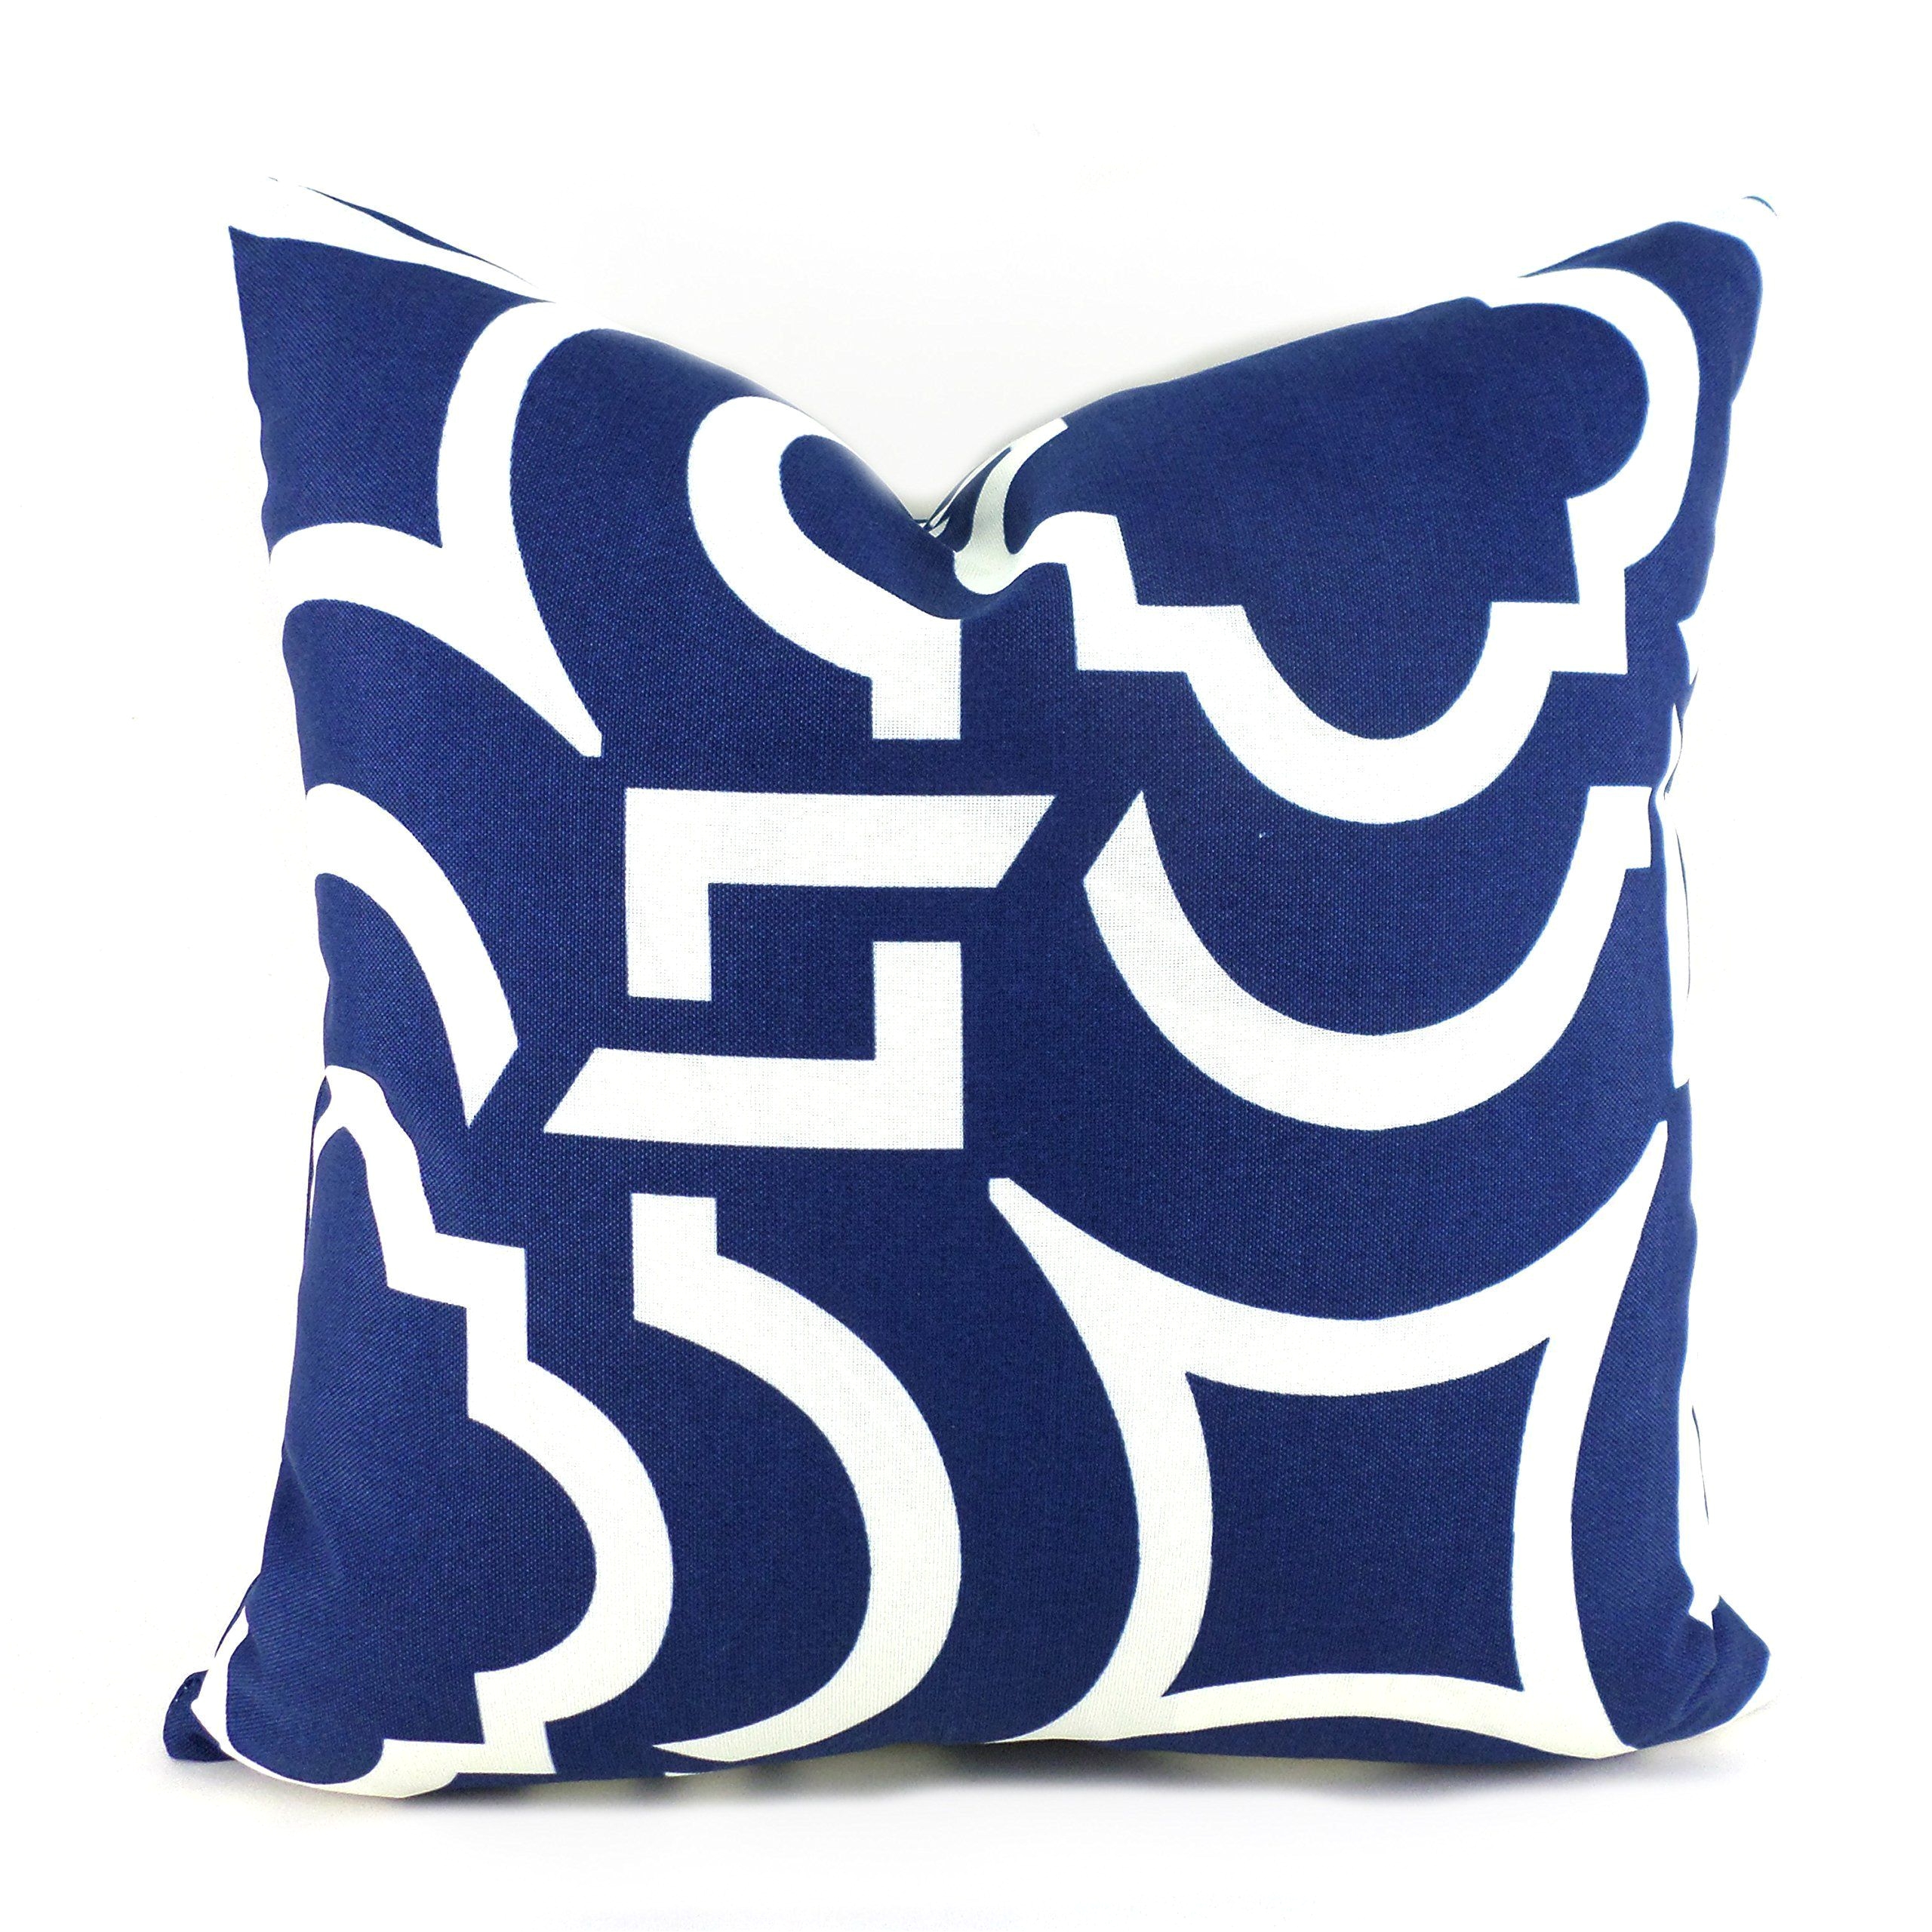 outdoor decorative throw pillow cover any size od carmody navy fabulous designer pillow covers